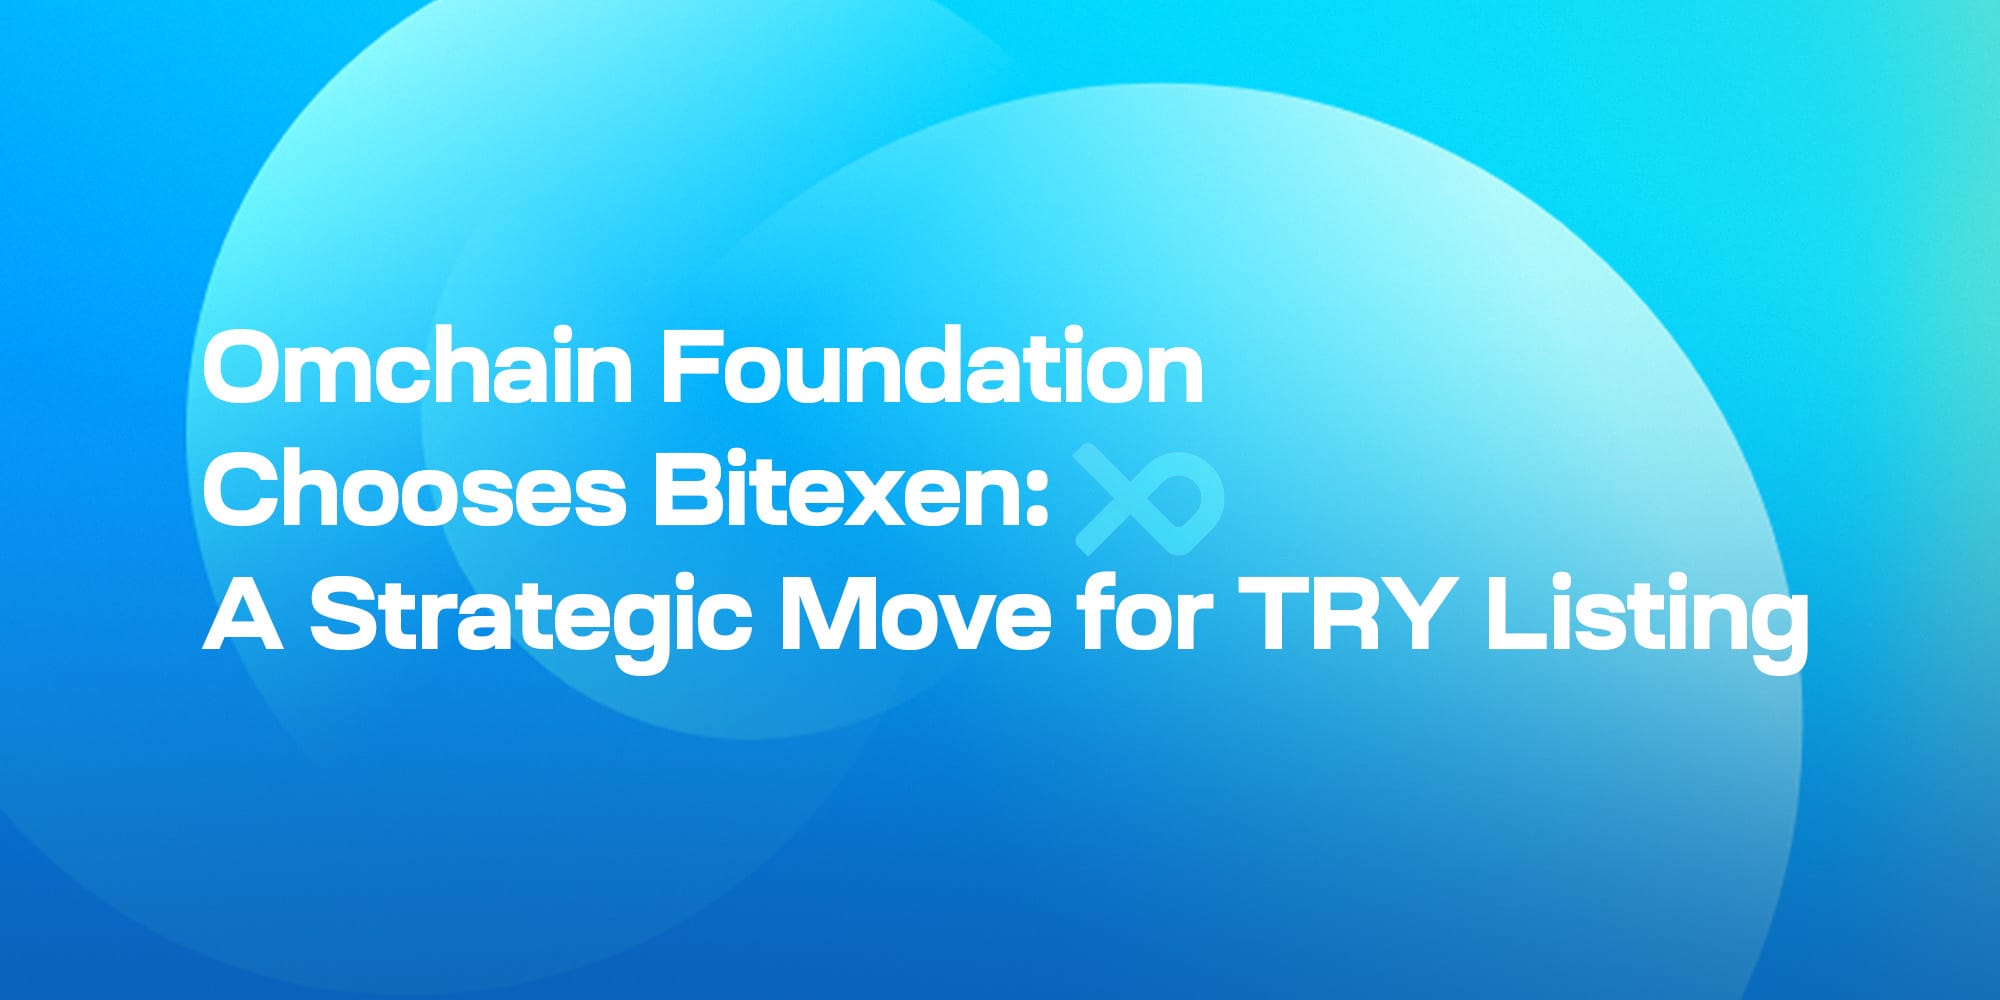 Omchain Foundation Chooses Bitexen: A Strategic Move for TRY Listing